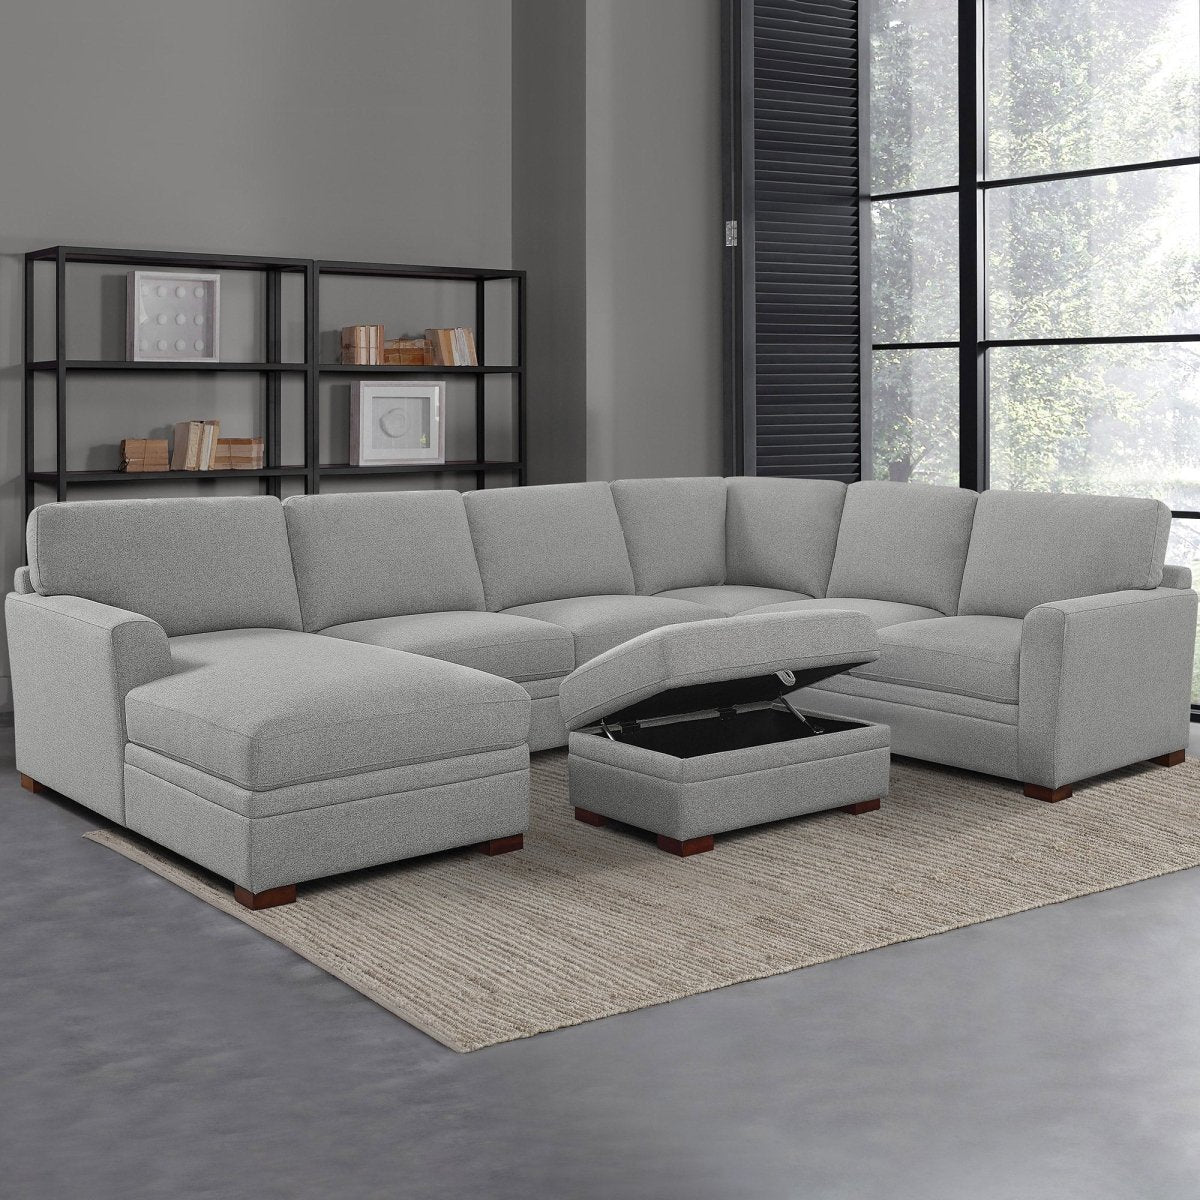 Thomasville Langdon Fabric Sectional with Storage Ottoman - Alpine Outlets